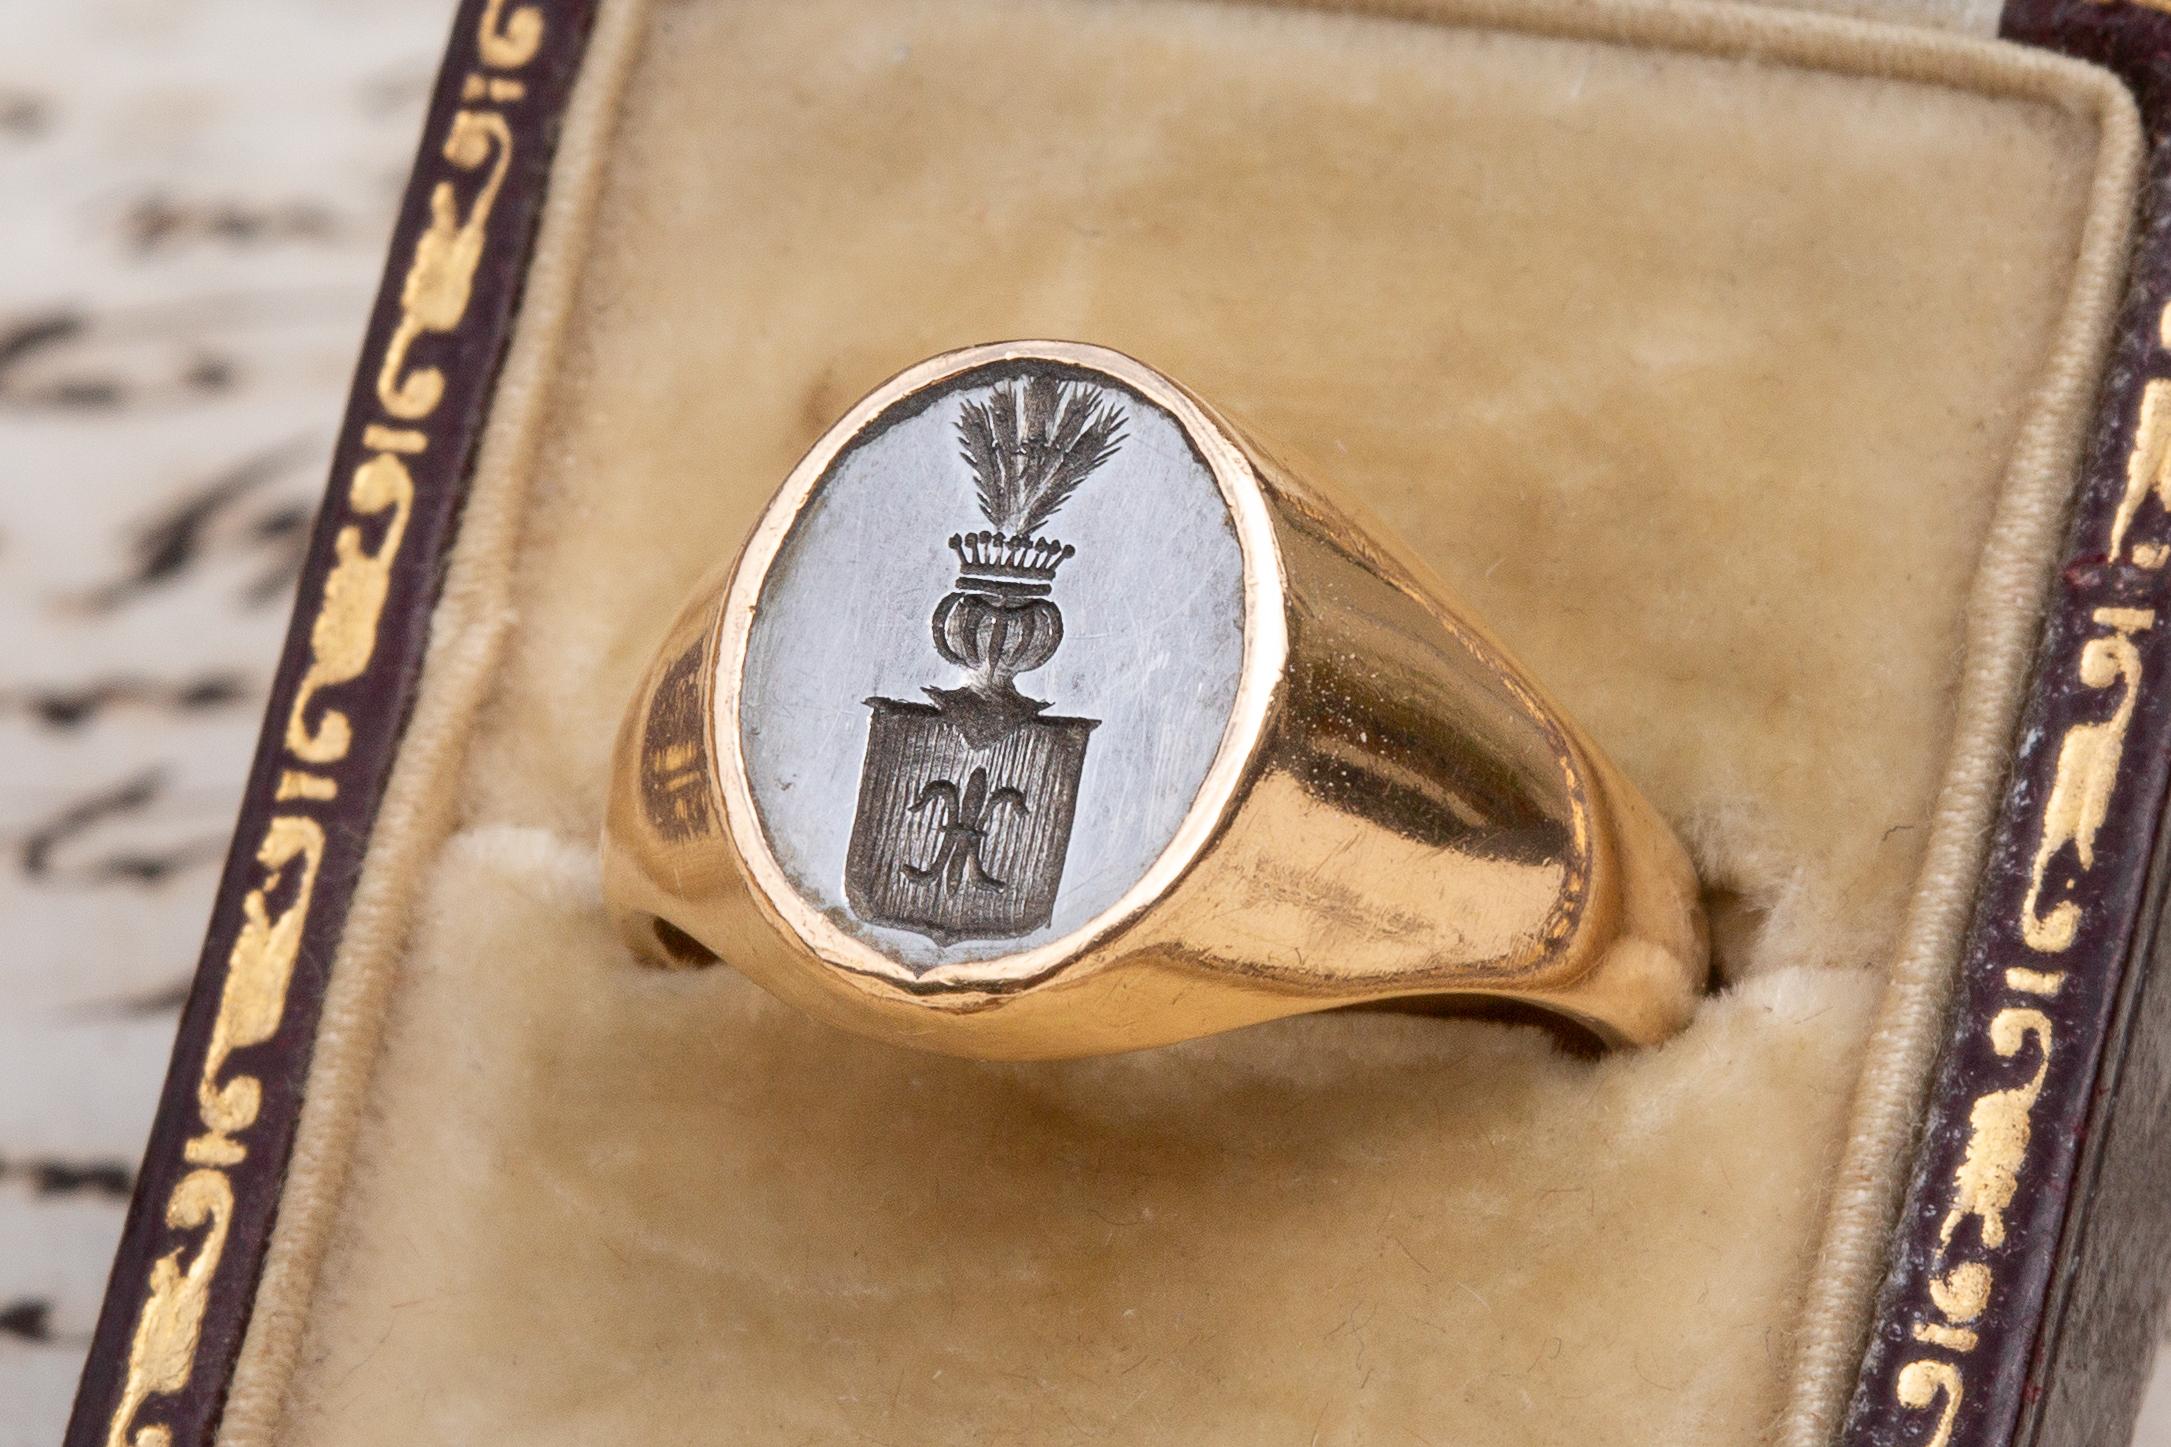 Antique Heavy French 21K Gold Napoleonic Coat of Arms Intaglio Signet Ring 

Superb engraved steel intaglio signet ring made in France dating to the late 18th century. The ring is hallmarked with a rare French ‘poinçon de décharge’ of a squirrel to